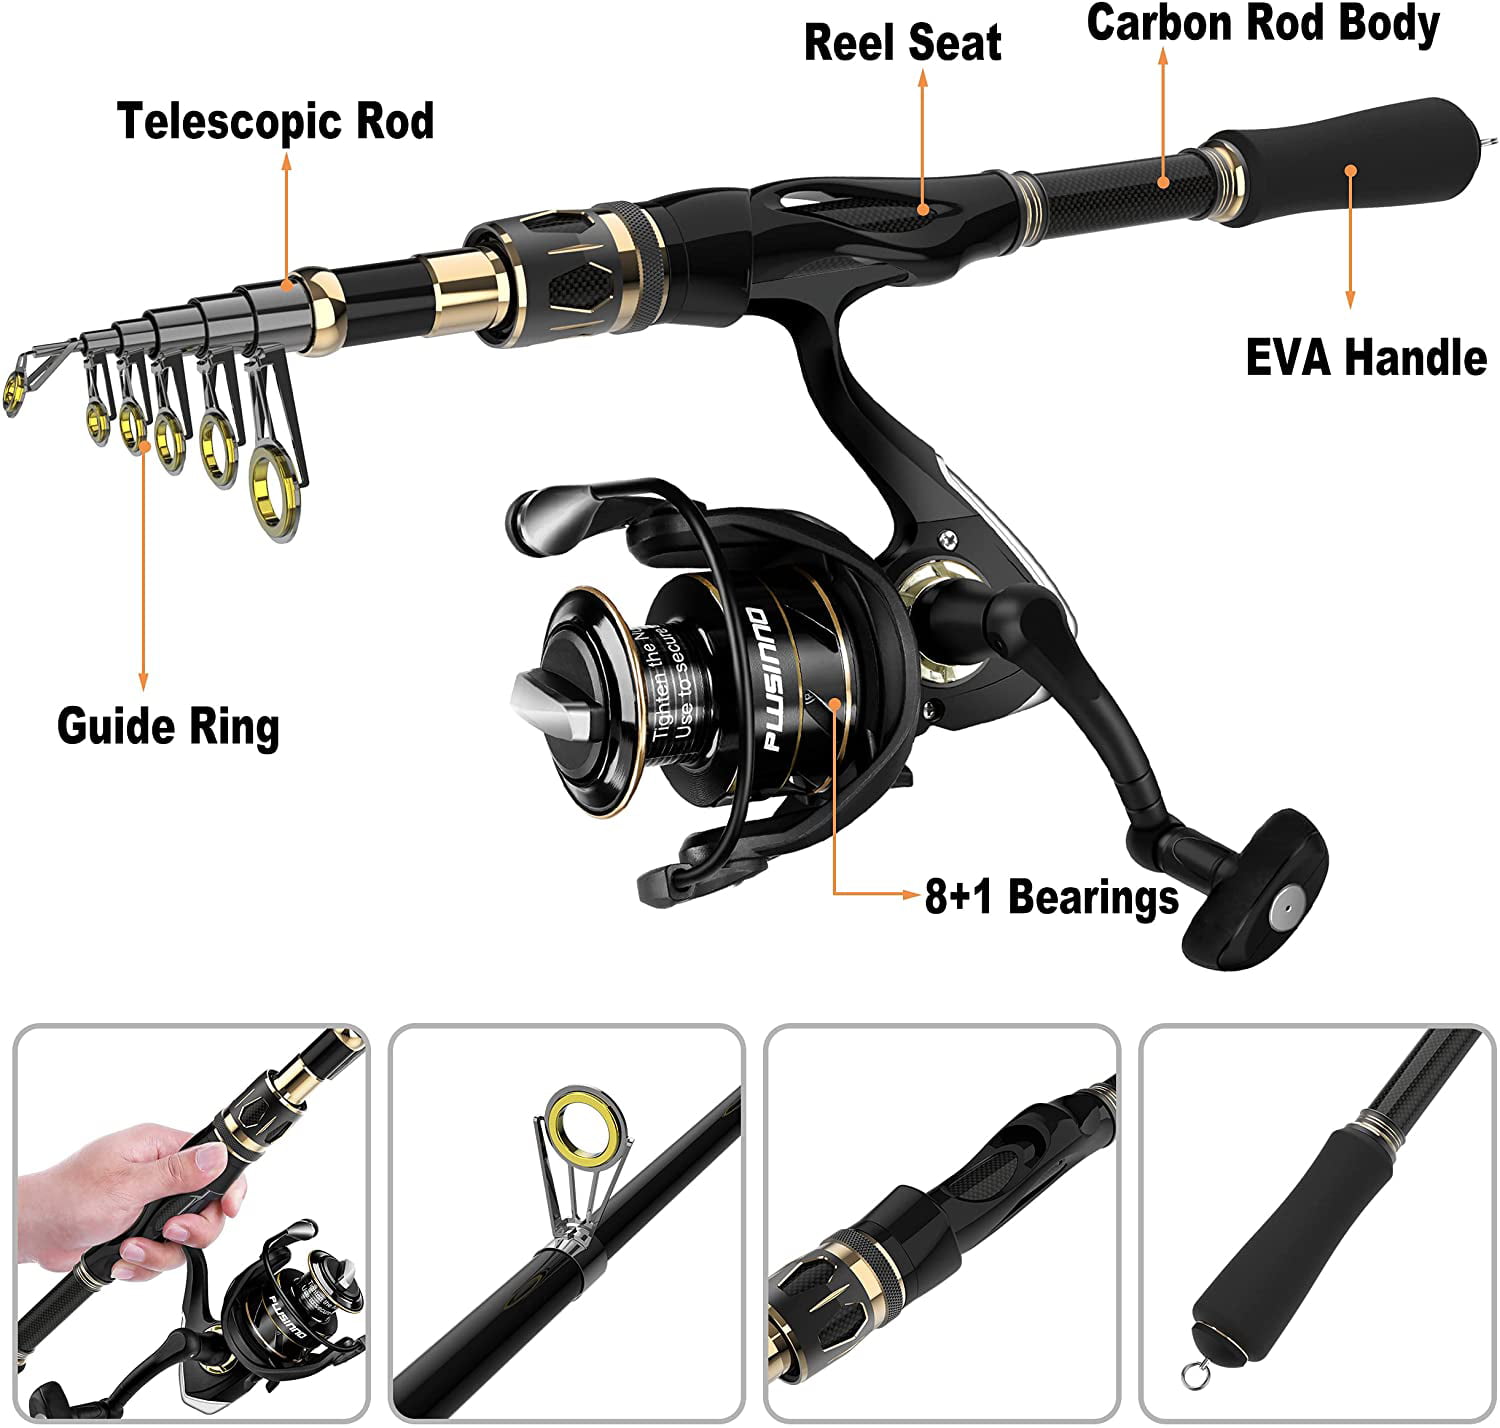 Carbon Fiber Fishing Rod for Travel Saltwater Freshwater Fishing PLUSINNO Fishing Rod and Reel Combos Set,Telescopic Fishing Pole with Spinning Reels 